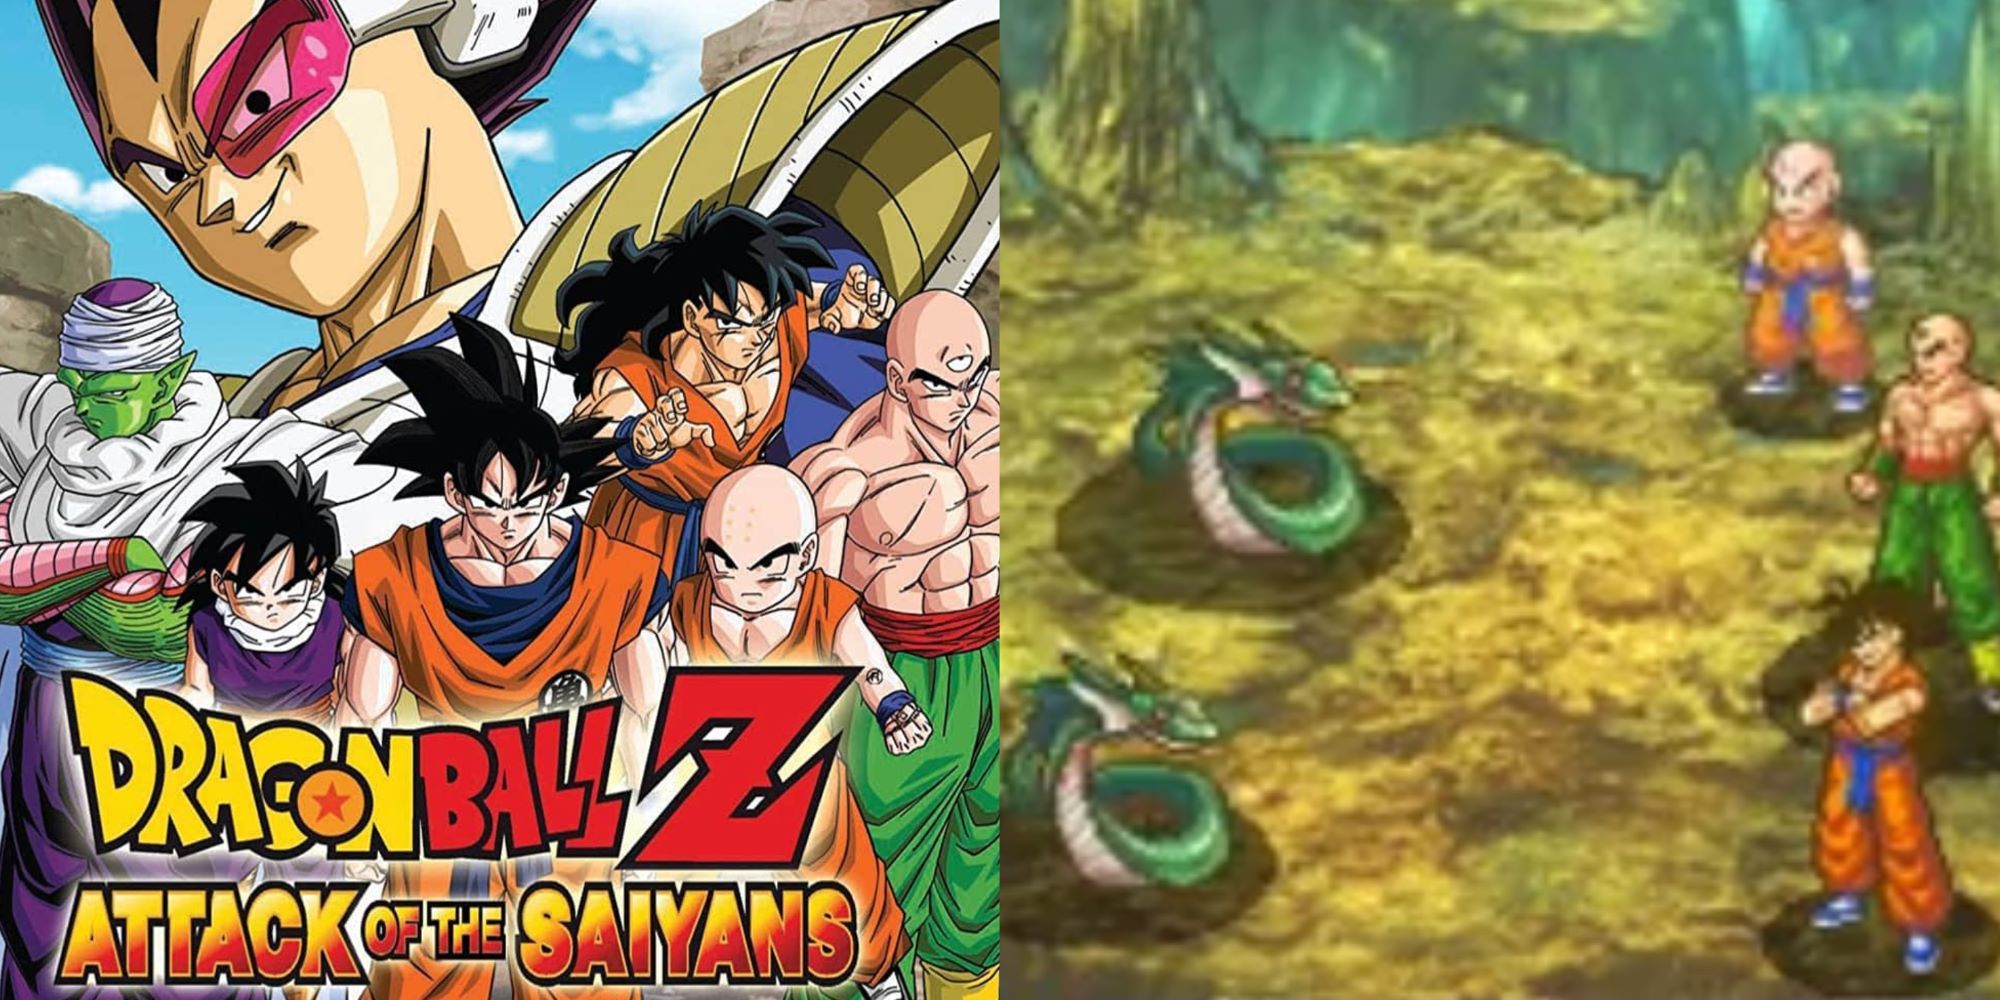 dbz attack of the saiyans cover and gameplay with cast and krillin, tien and yamcha fighting snakes